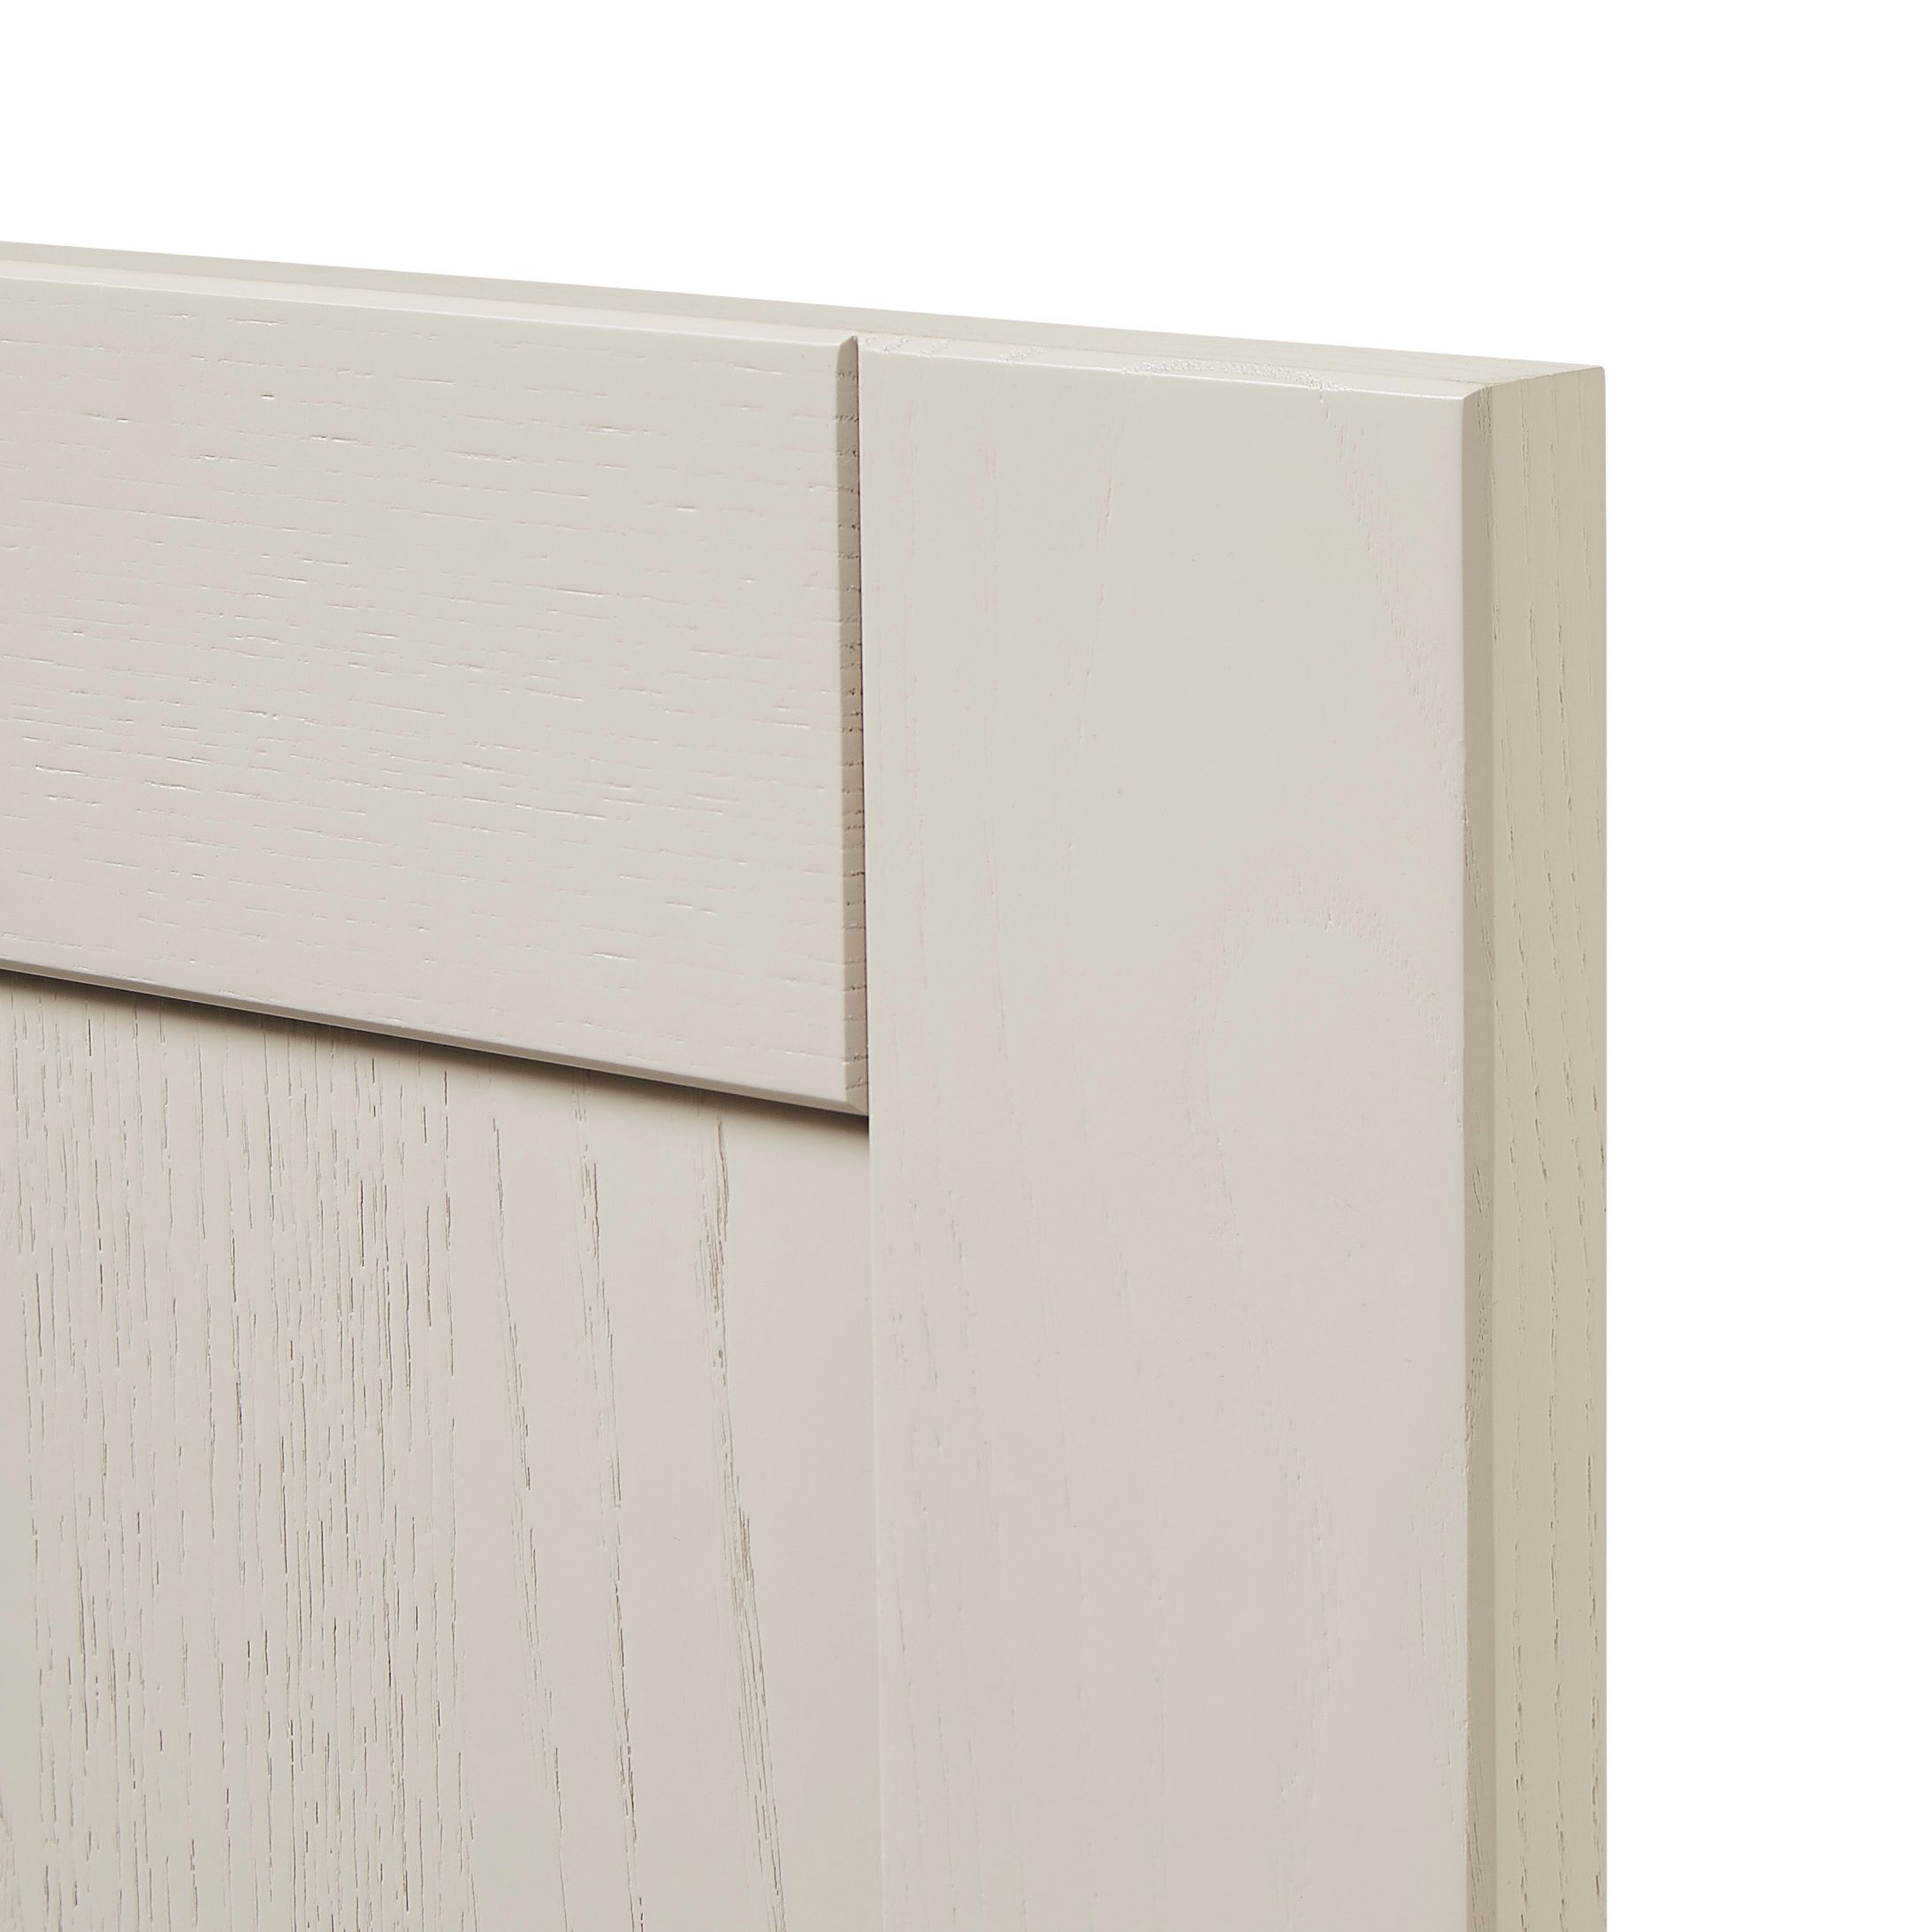 GoodHome Verbena Matt cashmere painted natural ash shaker Drawer front (W)500mm, Pack of 4